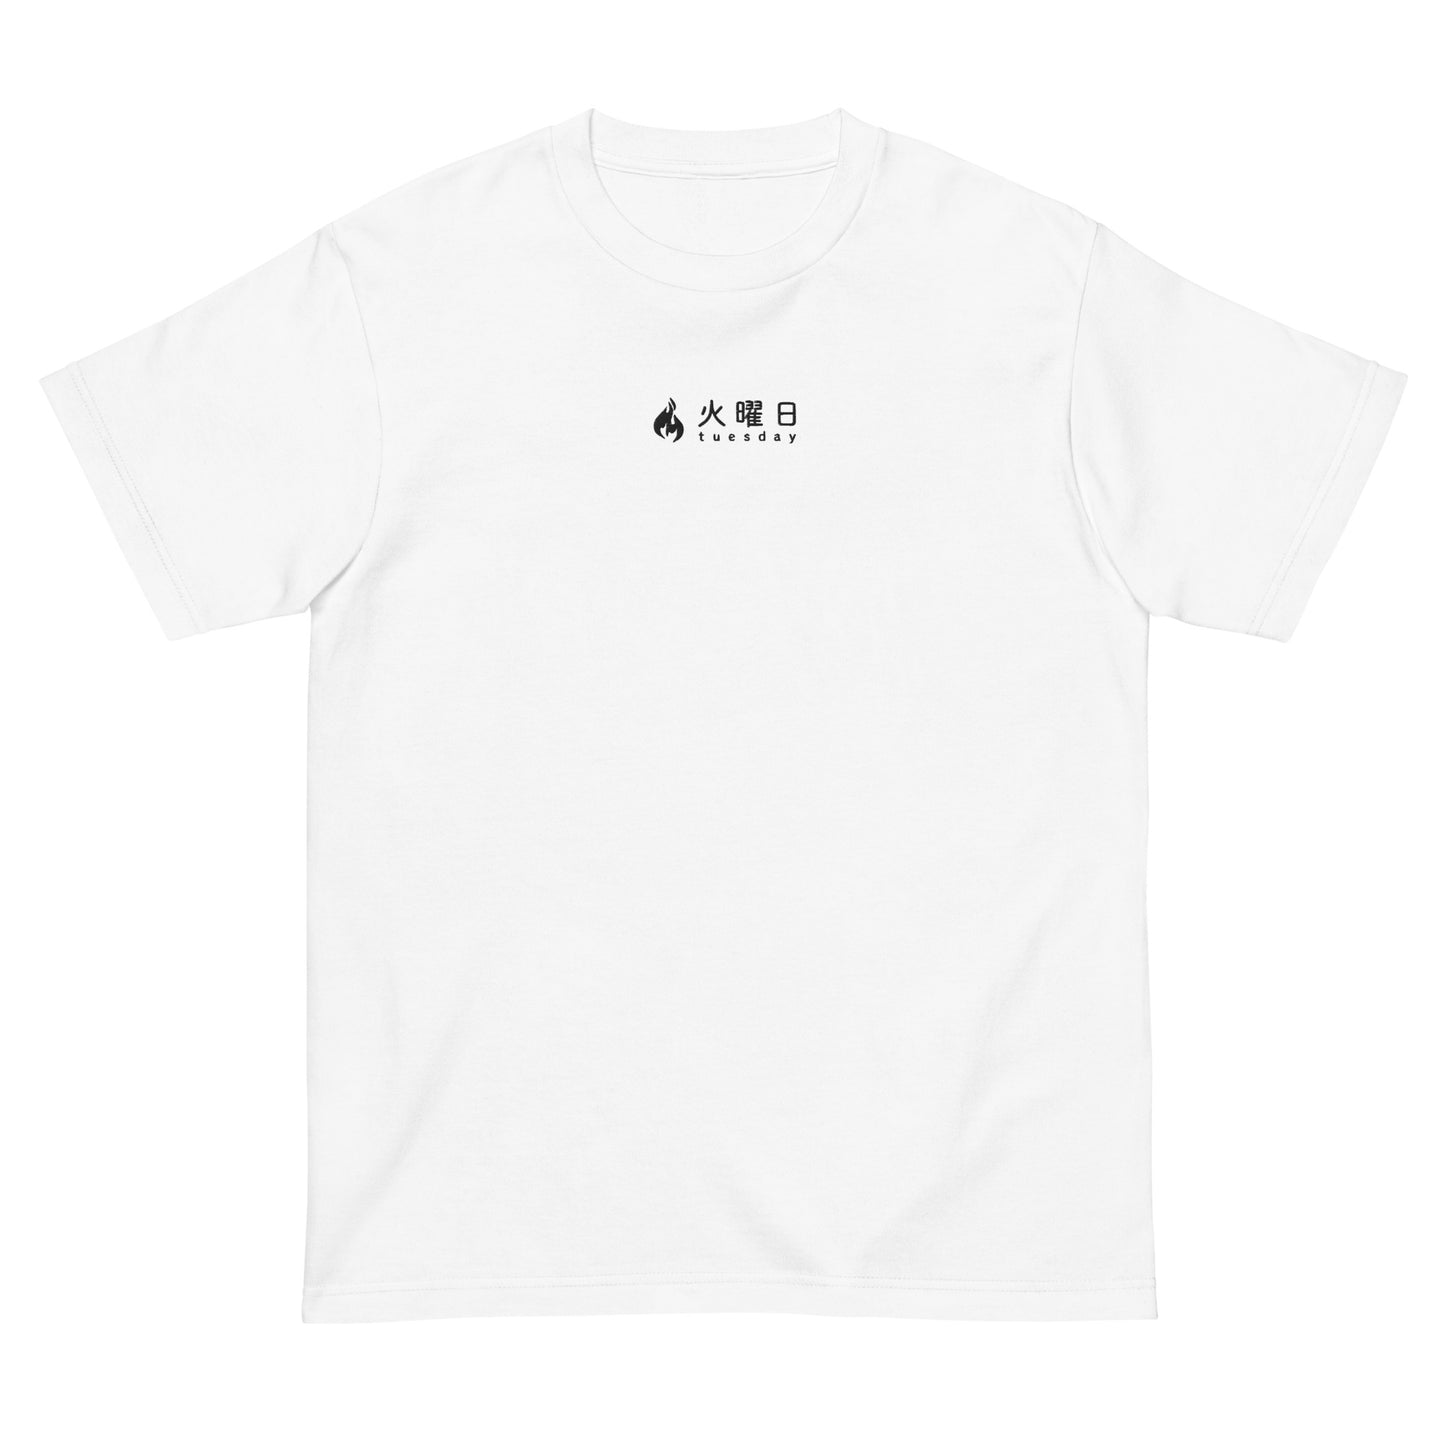 White High Quality Tee - Front Design with an Black embroidery "Tuesday" in Japanese and English